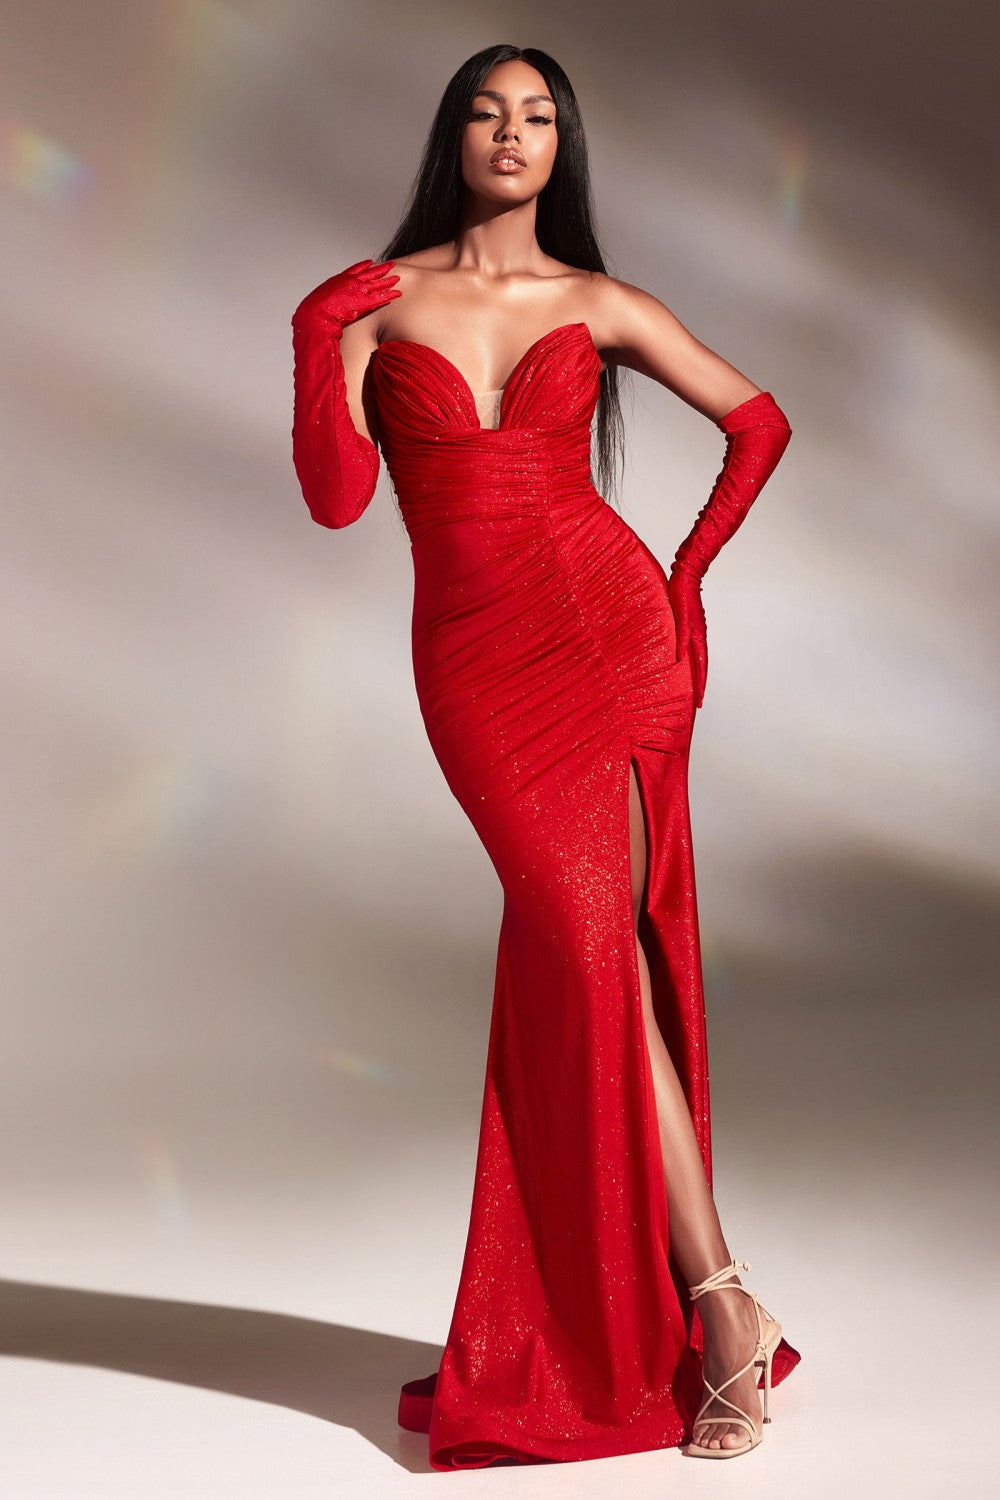 Red Strapless Stretch with Gloves Slit Gown CD889 - Women Evening Formal Gown - Special Occasion